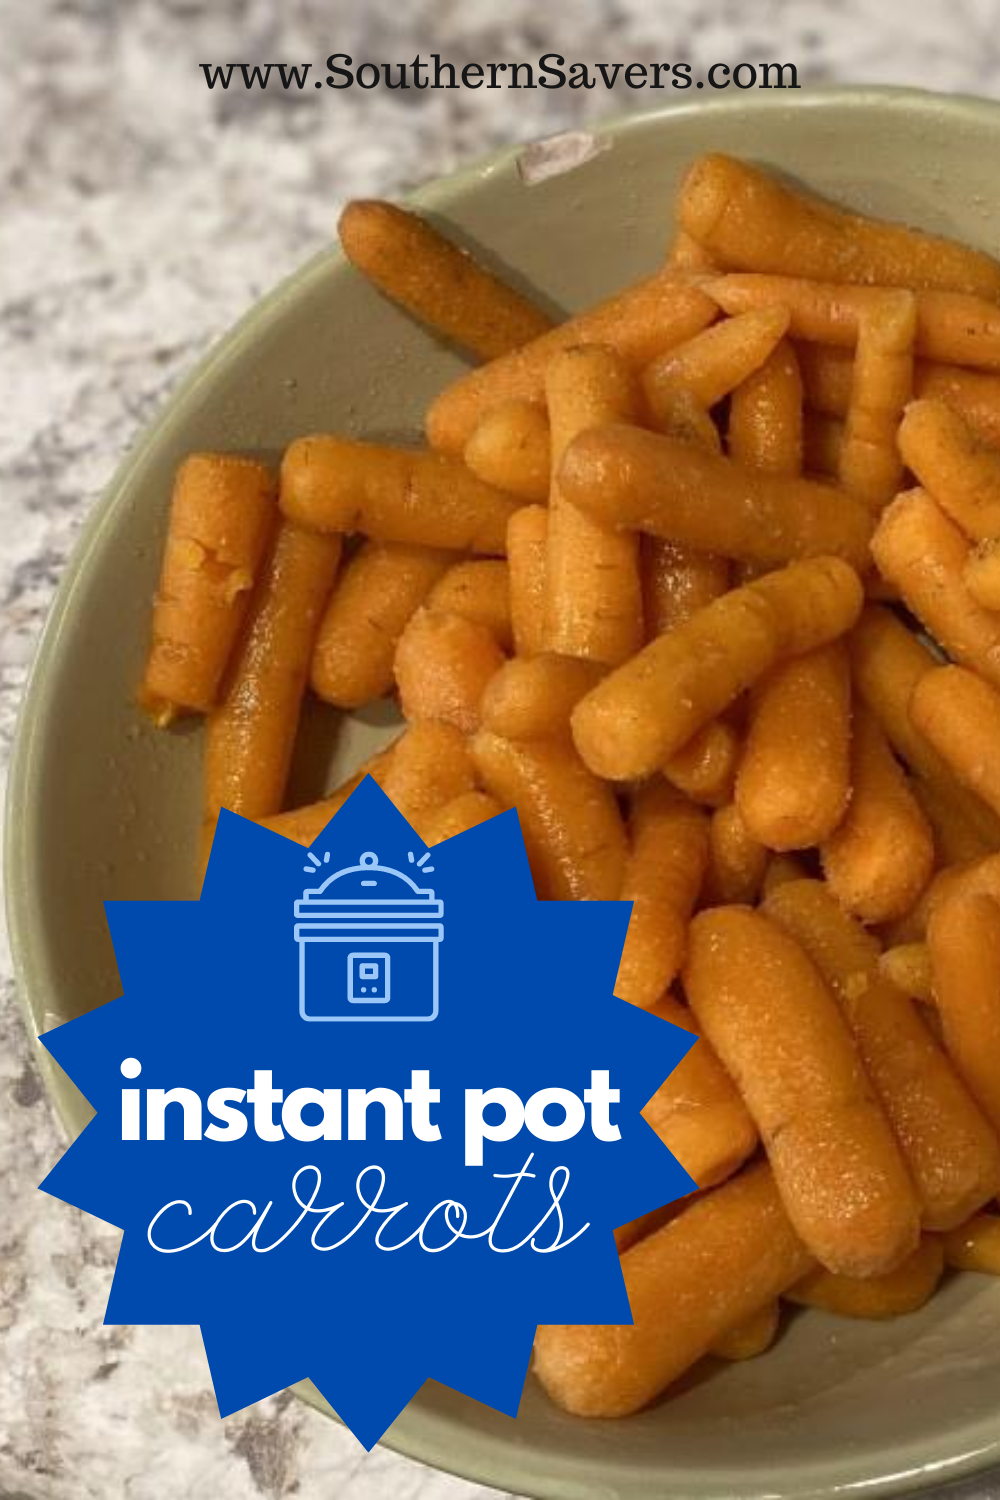 Making side dishes in the Instant Pot is great when you're using the oven or grill for your main dish. These Instant Pot carrots are quick and simple!